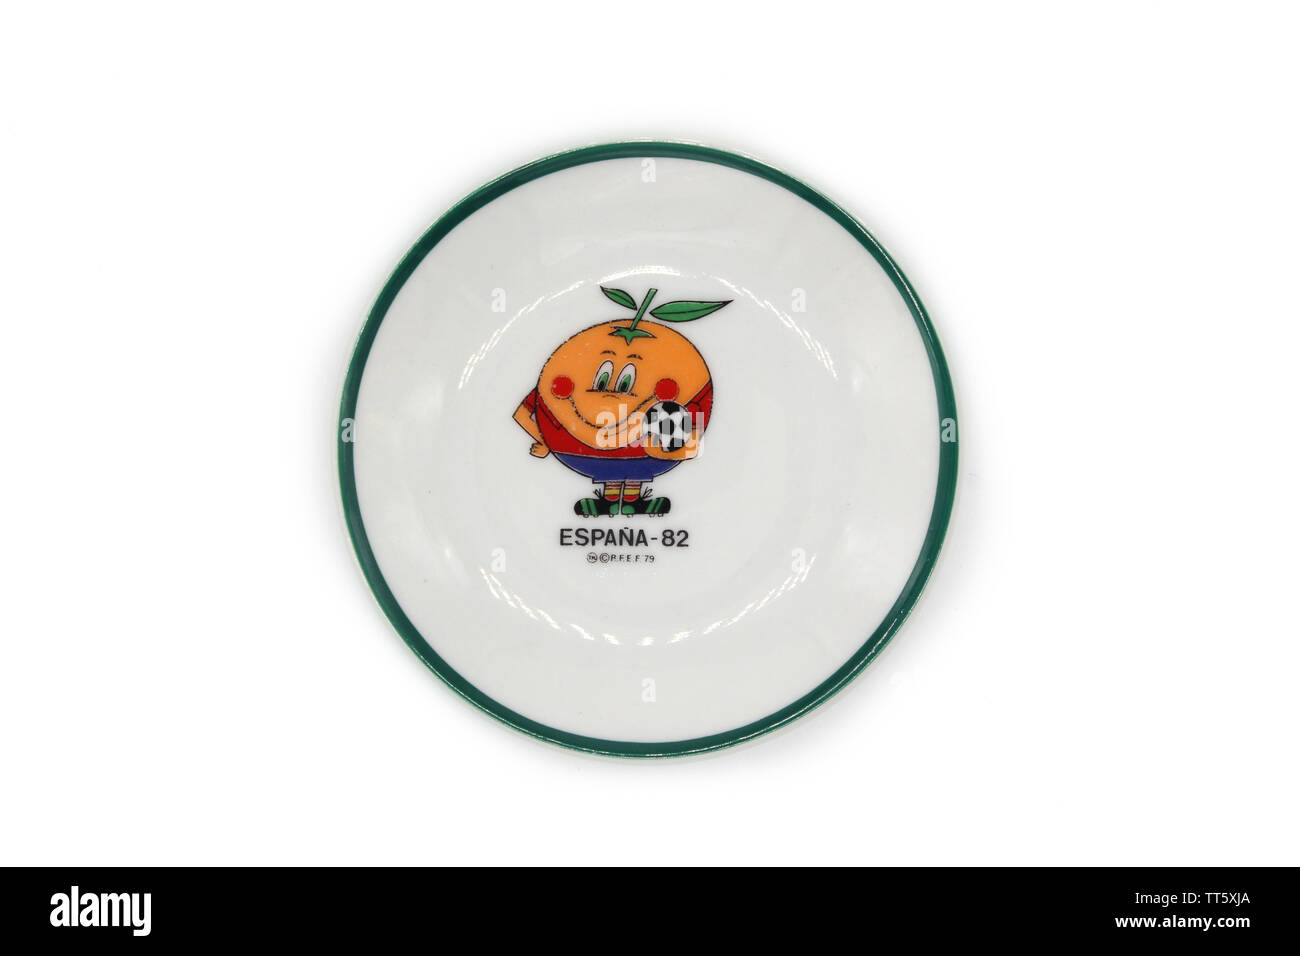 Vintage porcelain plate with logo Naranjito mascot of Soccer-football - World Cup Spain 1982, isolated on white background, close-up Stock Photo